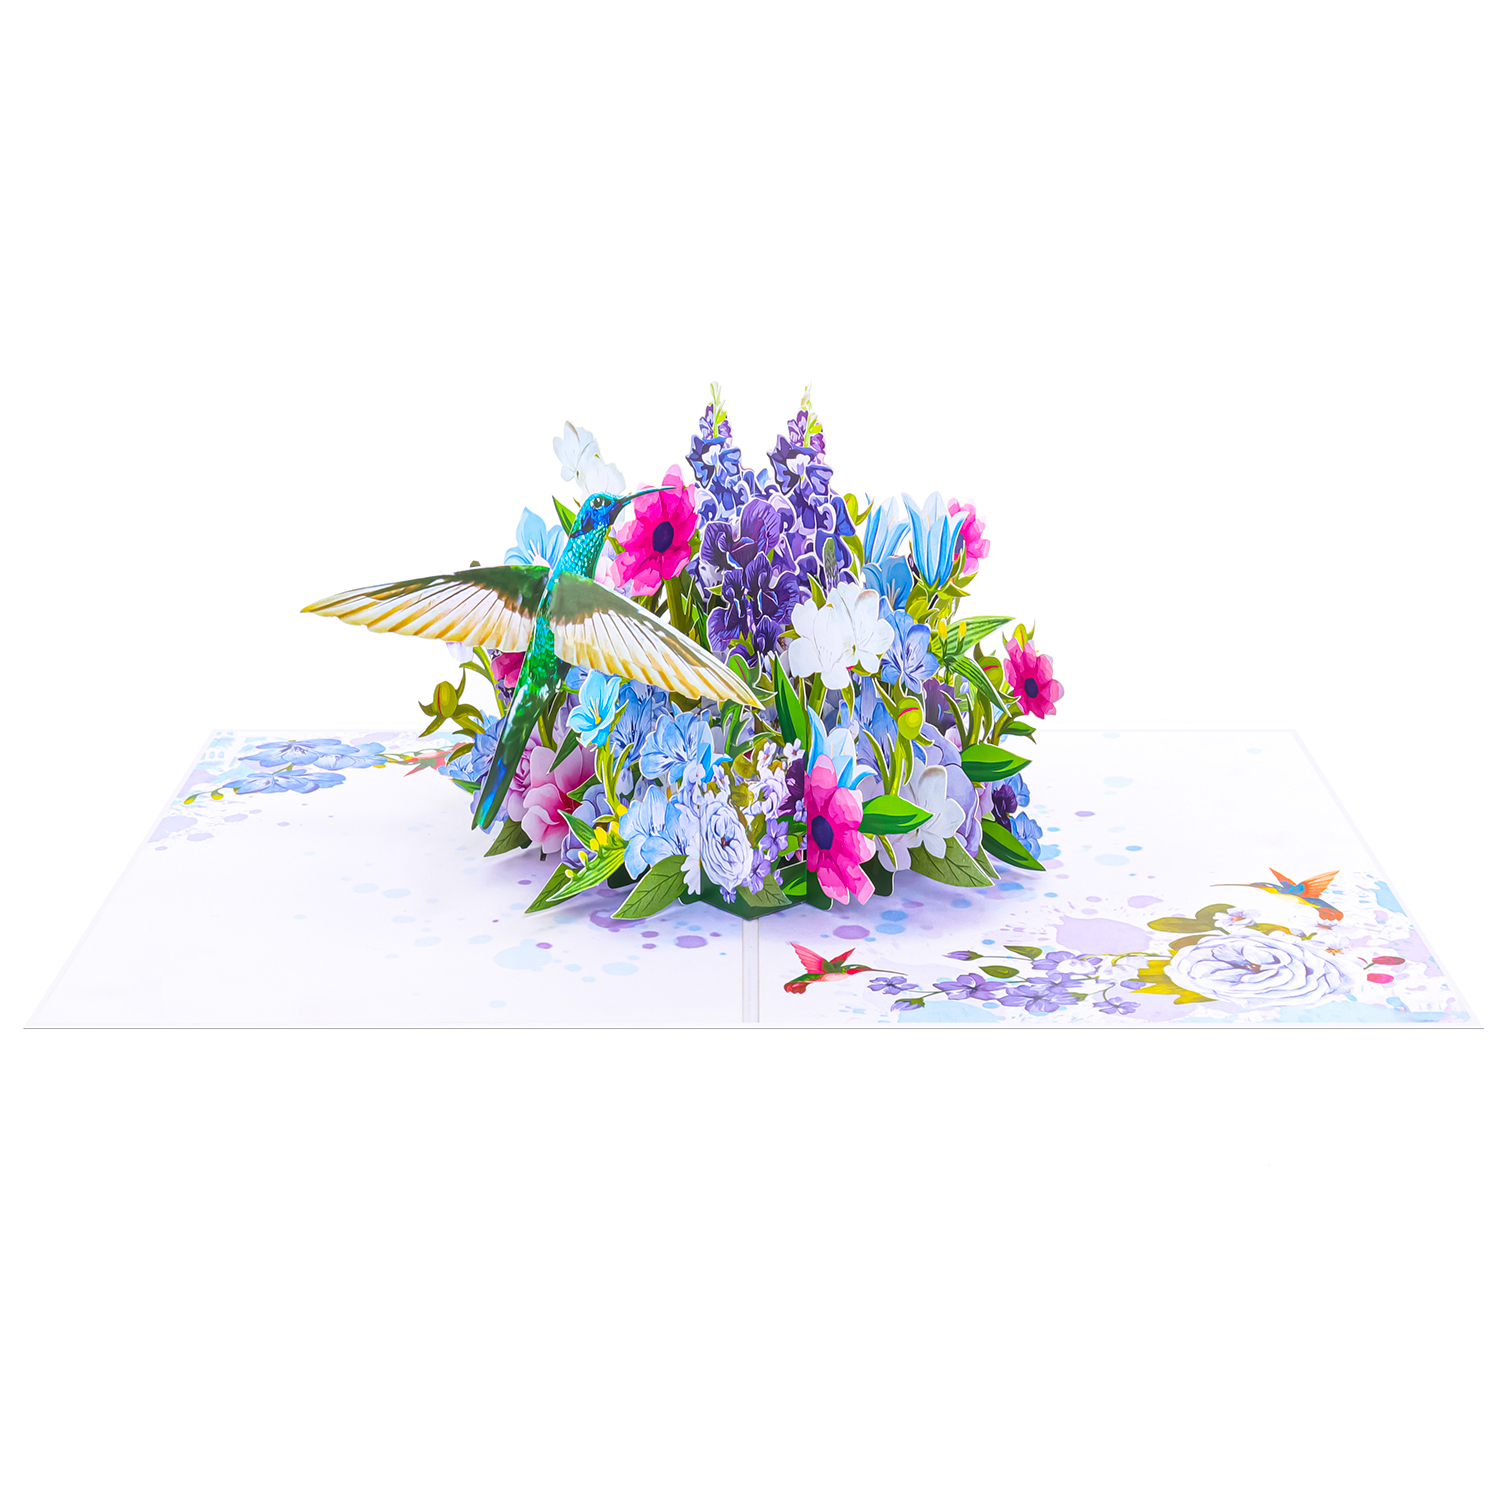 Mixed Flowers and Hummingbird Pop Up Card FL099 overview wholesale mothers day cards wholesale mothers day cards custom mother's day card pop up card wholesale manufacturer 3d pop up cards wholesale 3d greeting cards wholesale flowers hummingbird 3d card